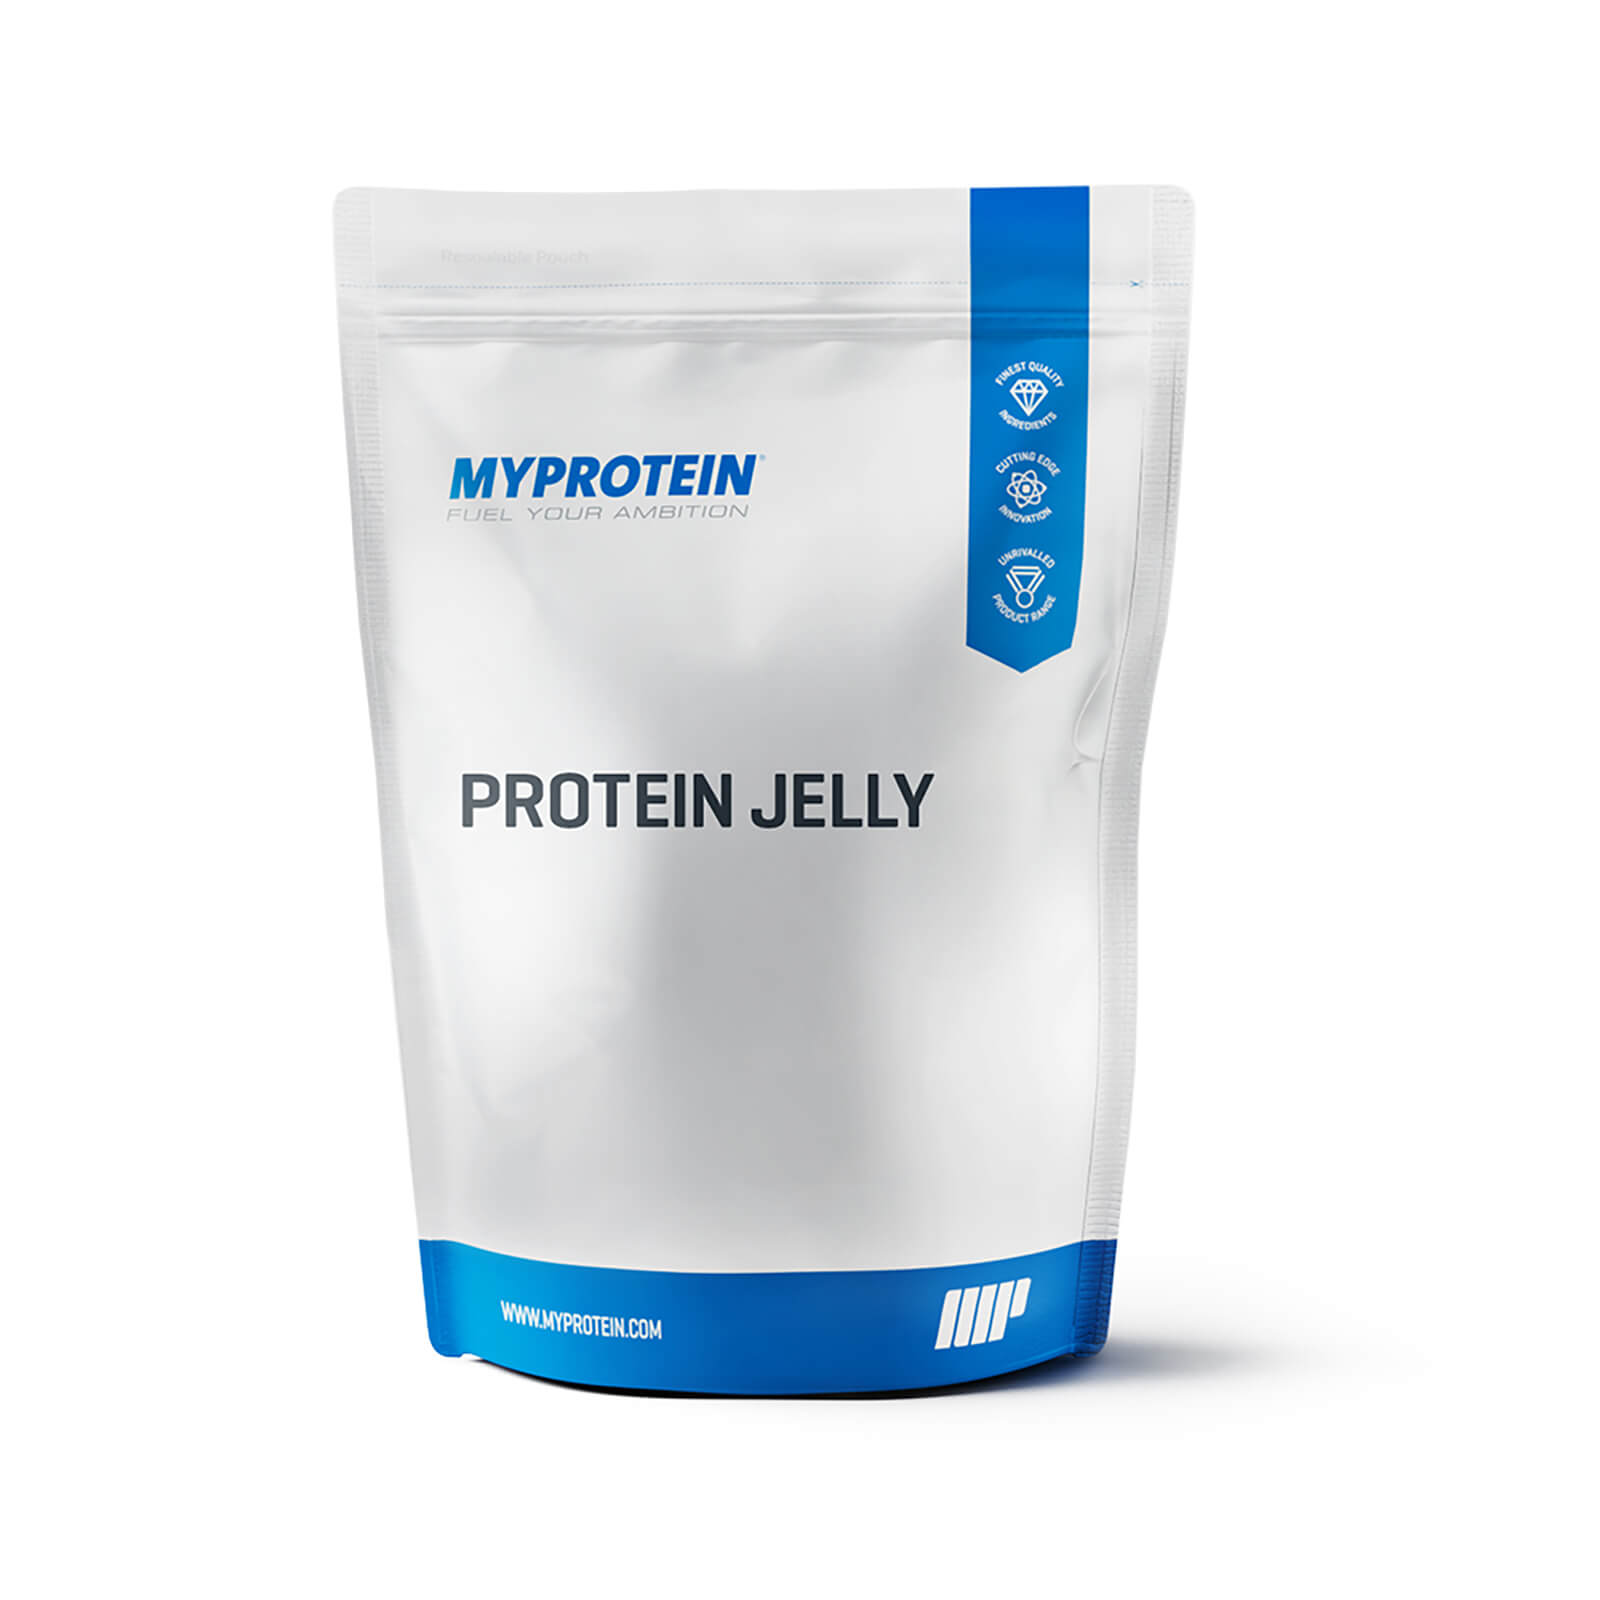 Protein Jelly